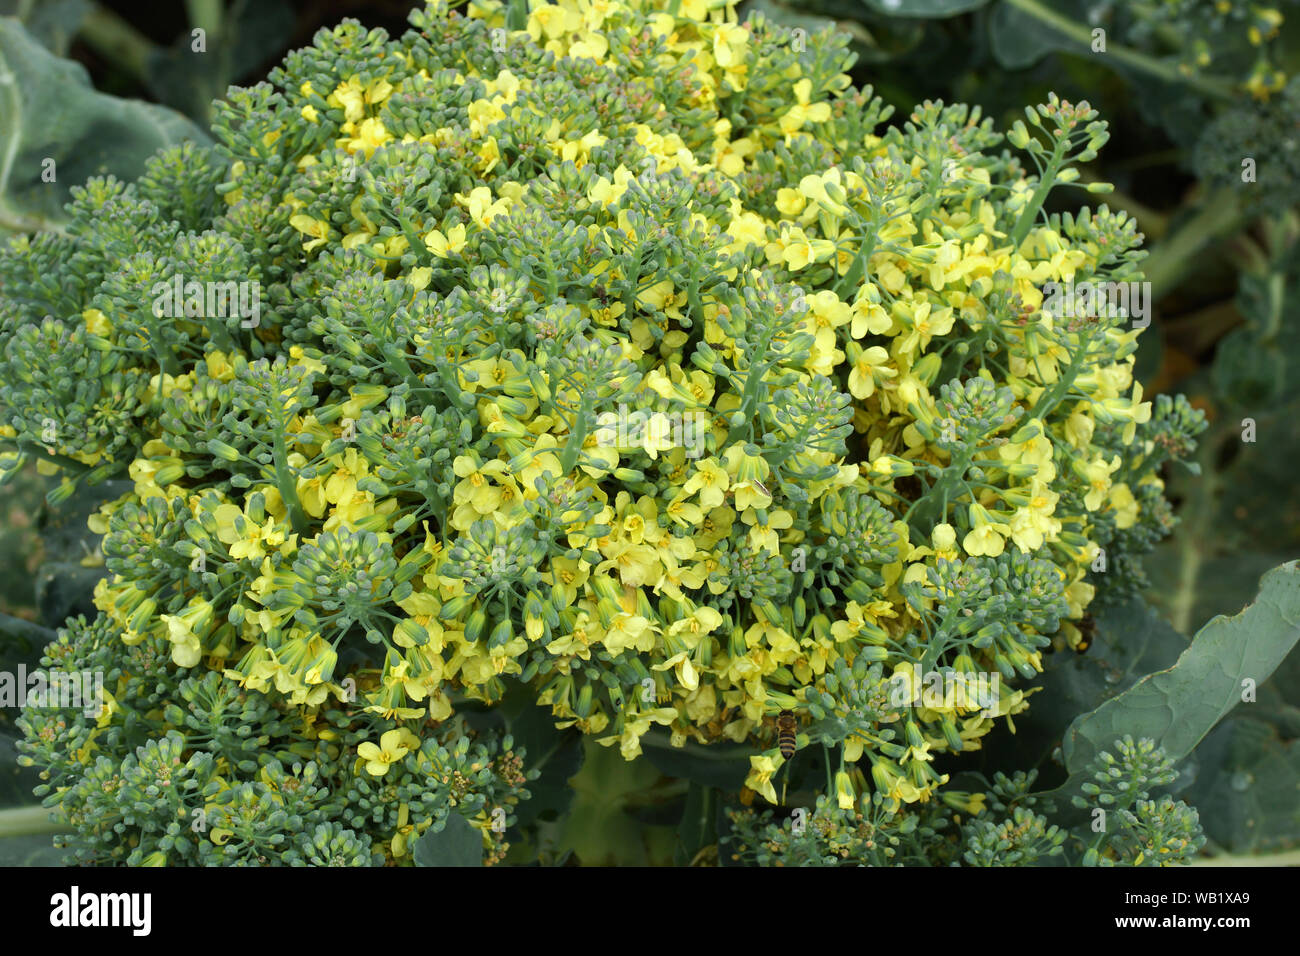 Broccoli in flower. Broccoli cabbage grows outdoors. Stock Photo